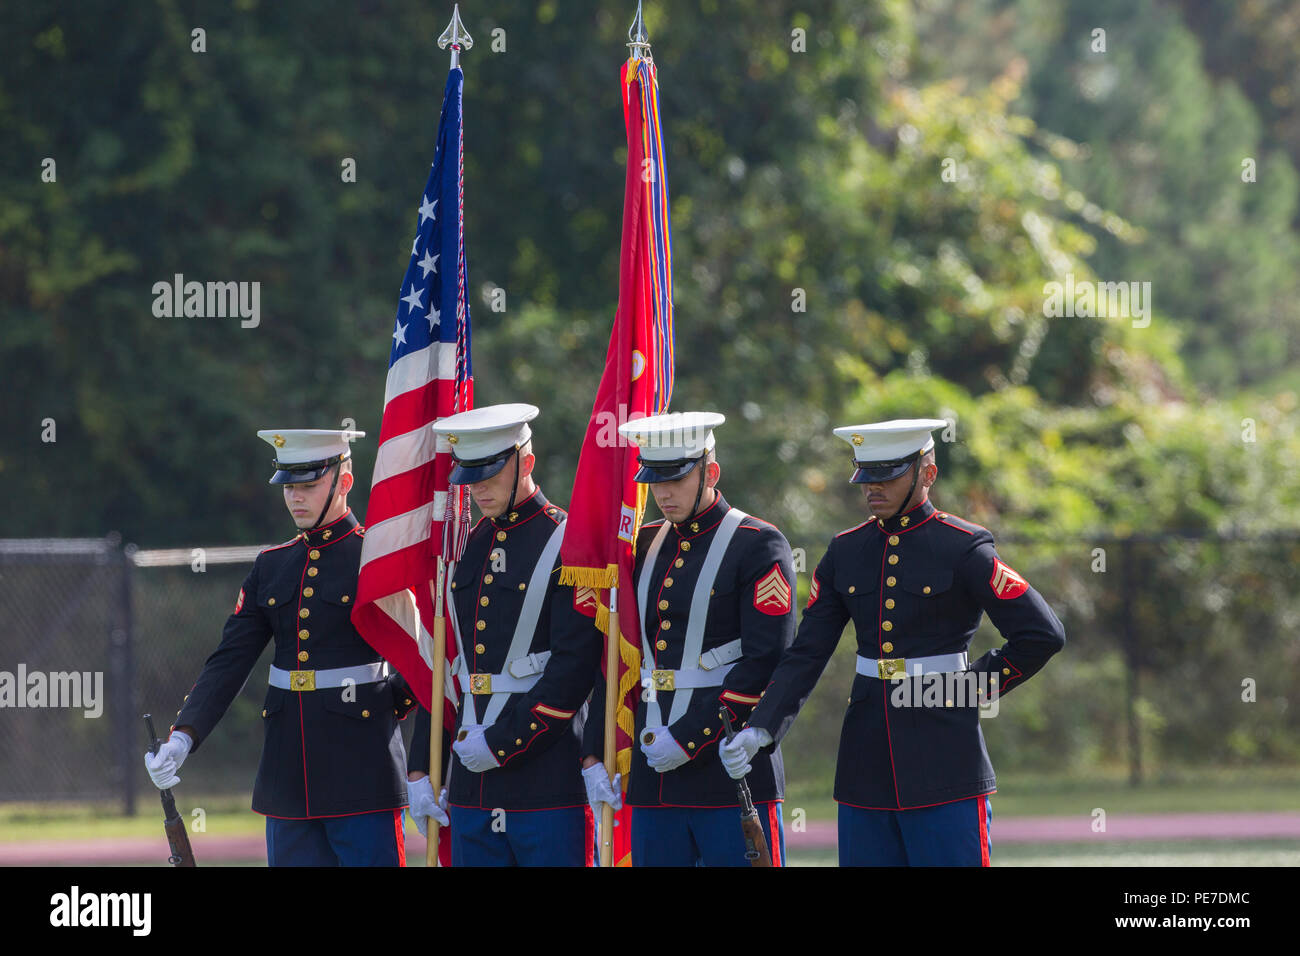 U.S. Marines with the color guard bow their heads during the Joint Daytime Ceremony at Harry B. Liversedge field on Camp Lejeune, N.C., Nov. 6, 2015. The ceremony is held every year in honor of the Marine Corps birthday and includes a historical uniform pageant, rededication of national and U.S. Marine Corps Colors and the traditional birthday cake cutting. (U.S. Marine Corps photo by Ms. Kaitlin Regan, COMCAM, MCI-East, Camp Lejeune/ Released) Stock Photo